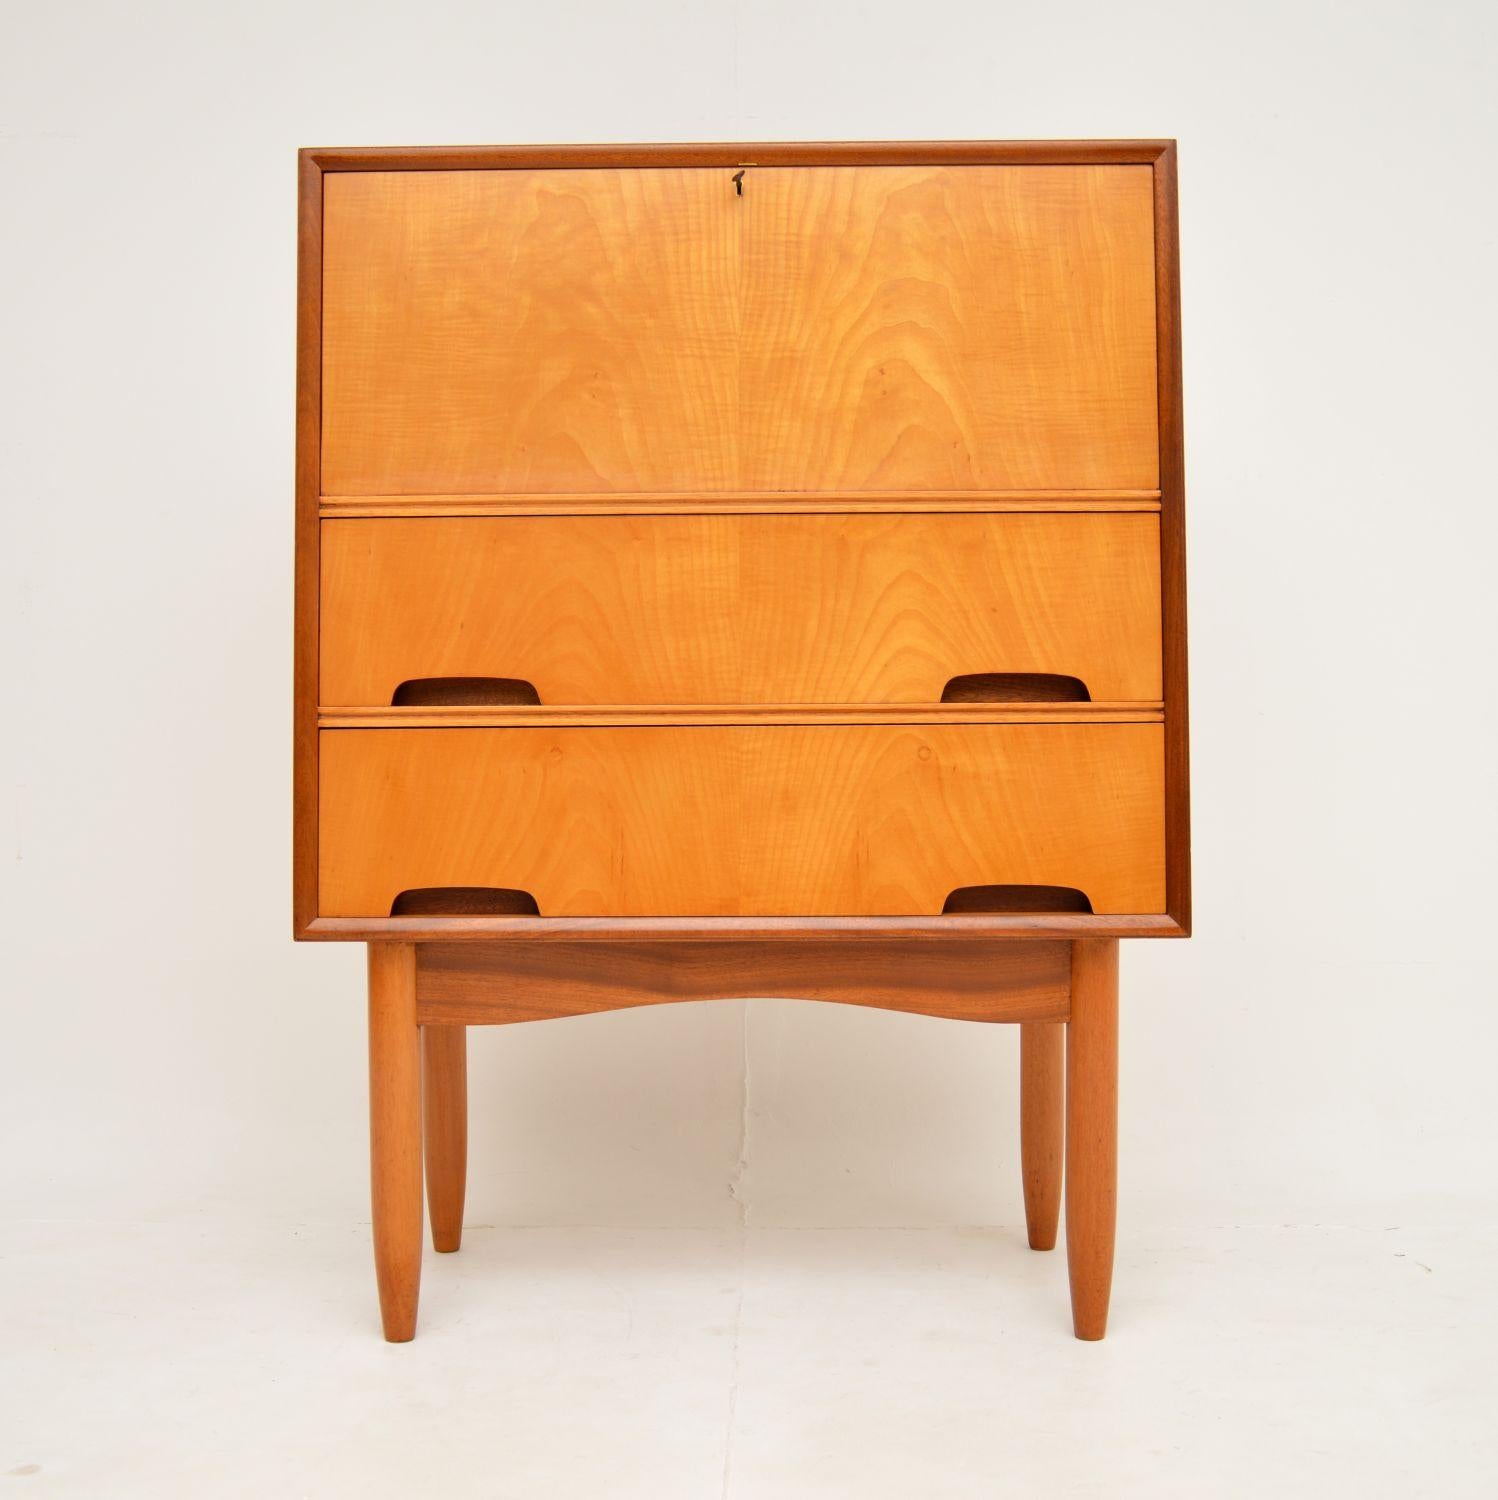 A stunning and very useful 1960’s sycamore & walnut bureau  by Peter Hayward for Vanson. This was designed by Peter Hayward, it was made by Vanson in England.

It has such a stylish and practical design the quality is outstanding. The sycamore front